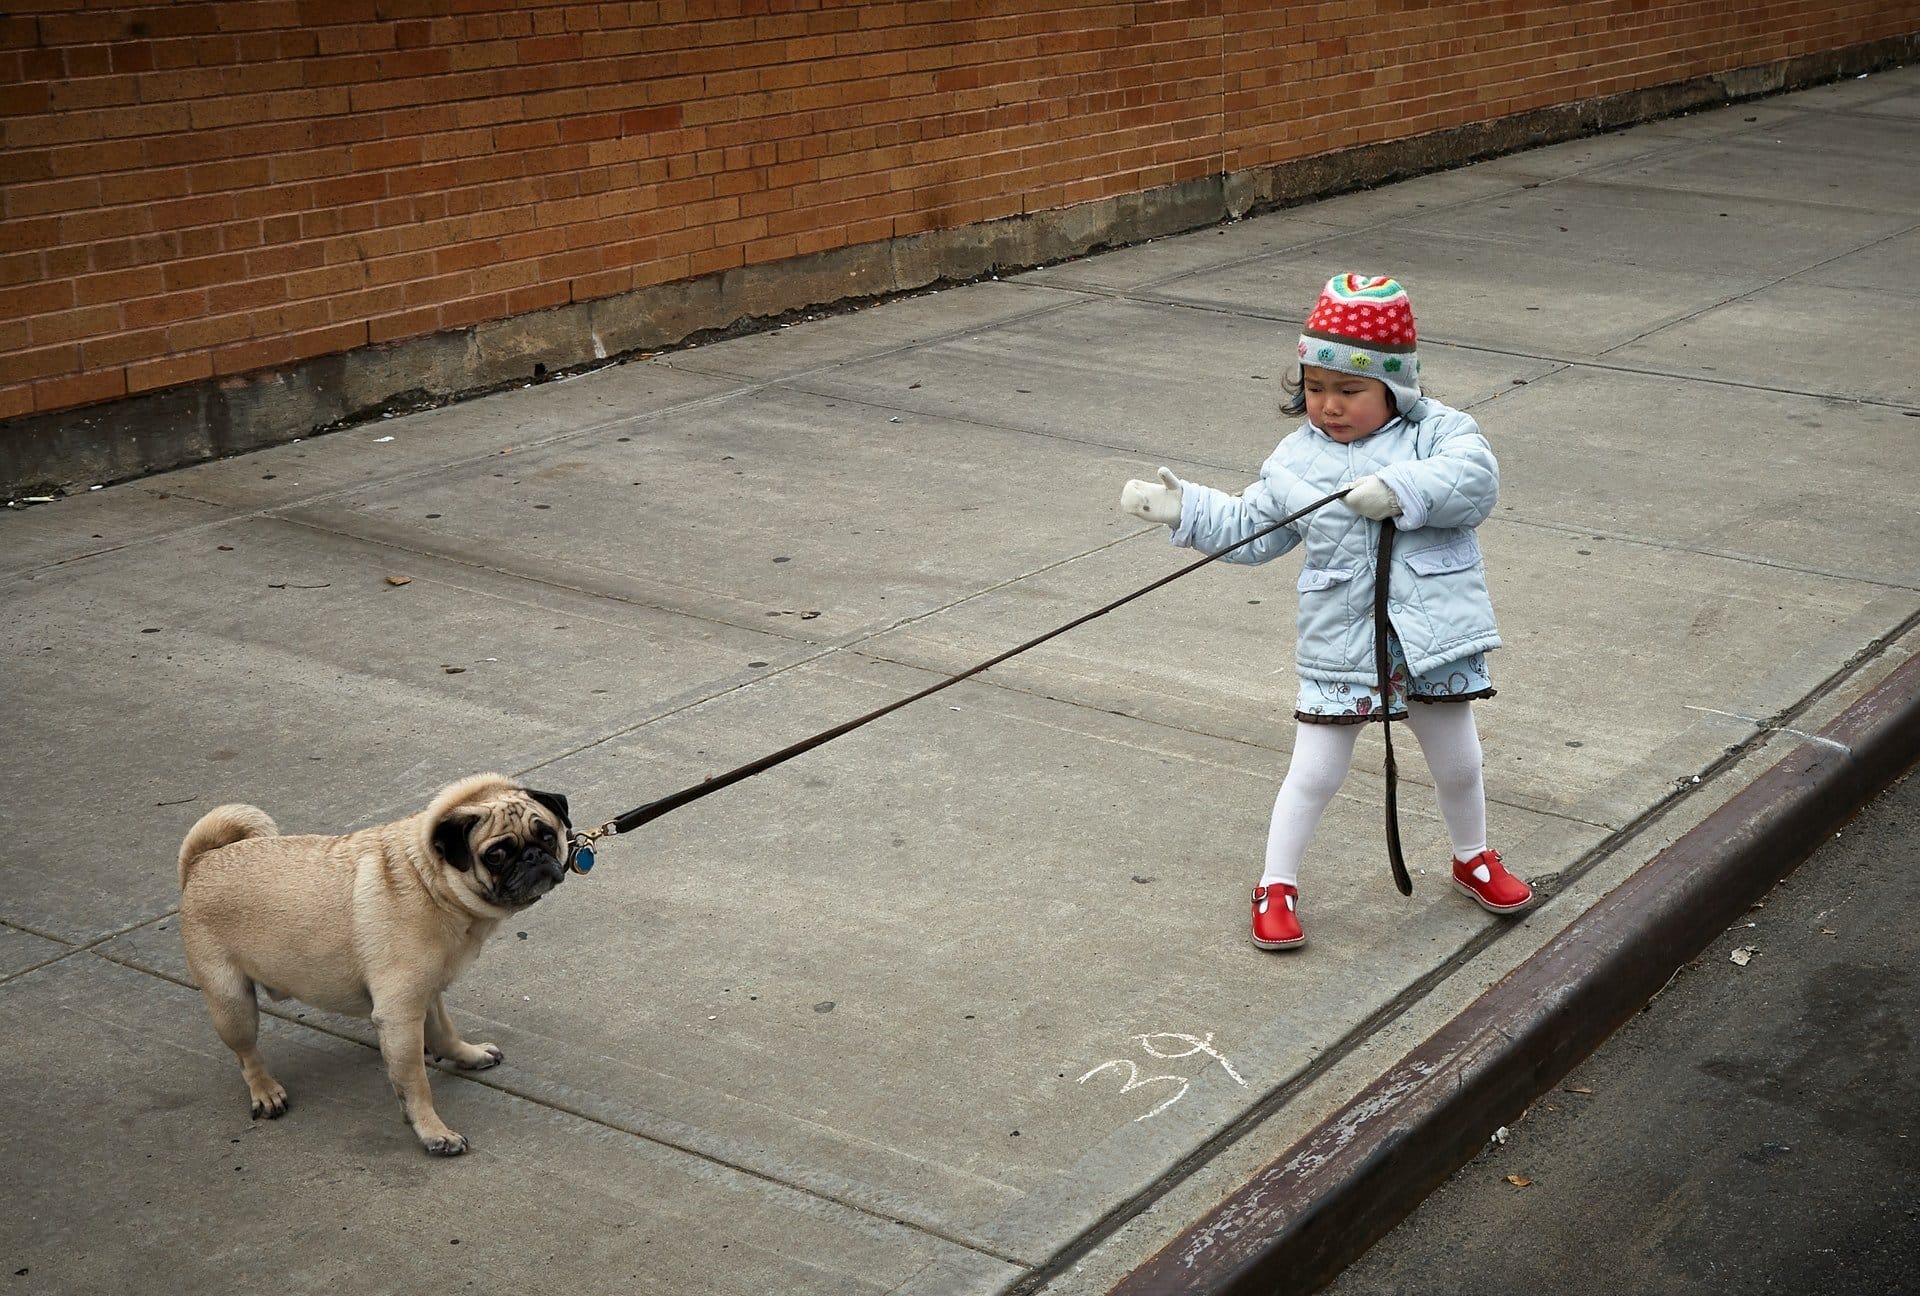 A kid trying to walk their dog on the street, which represents Hiring your friends in your startup